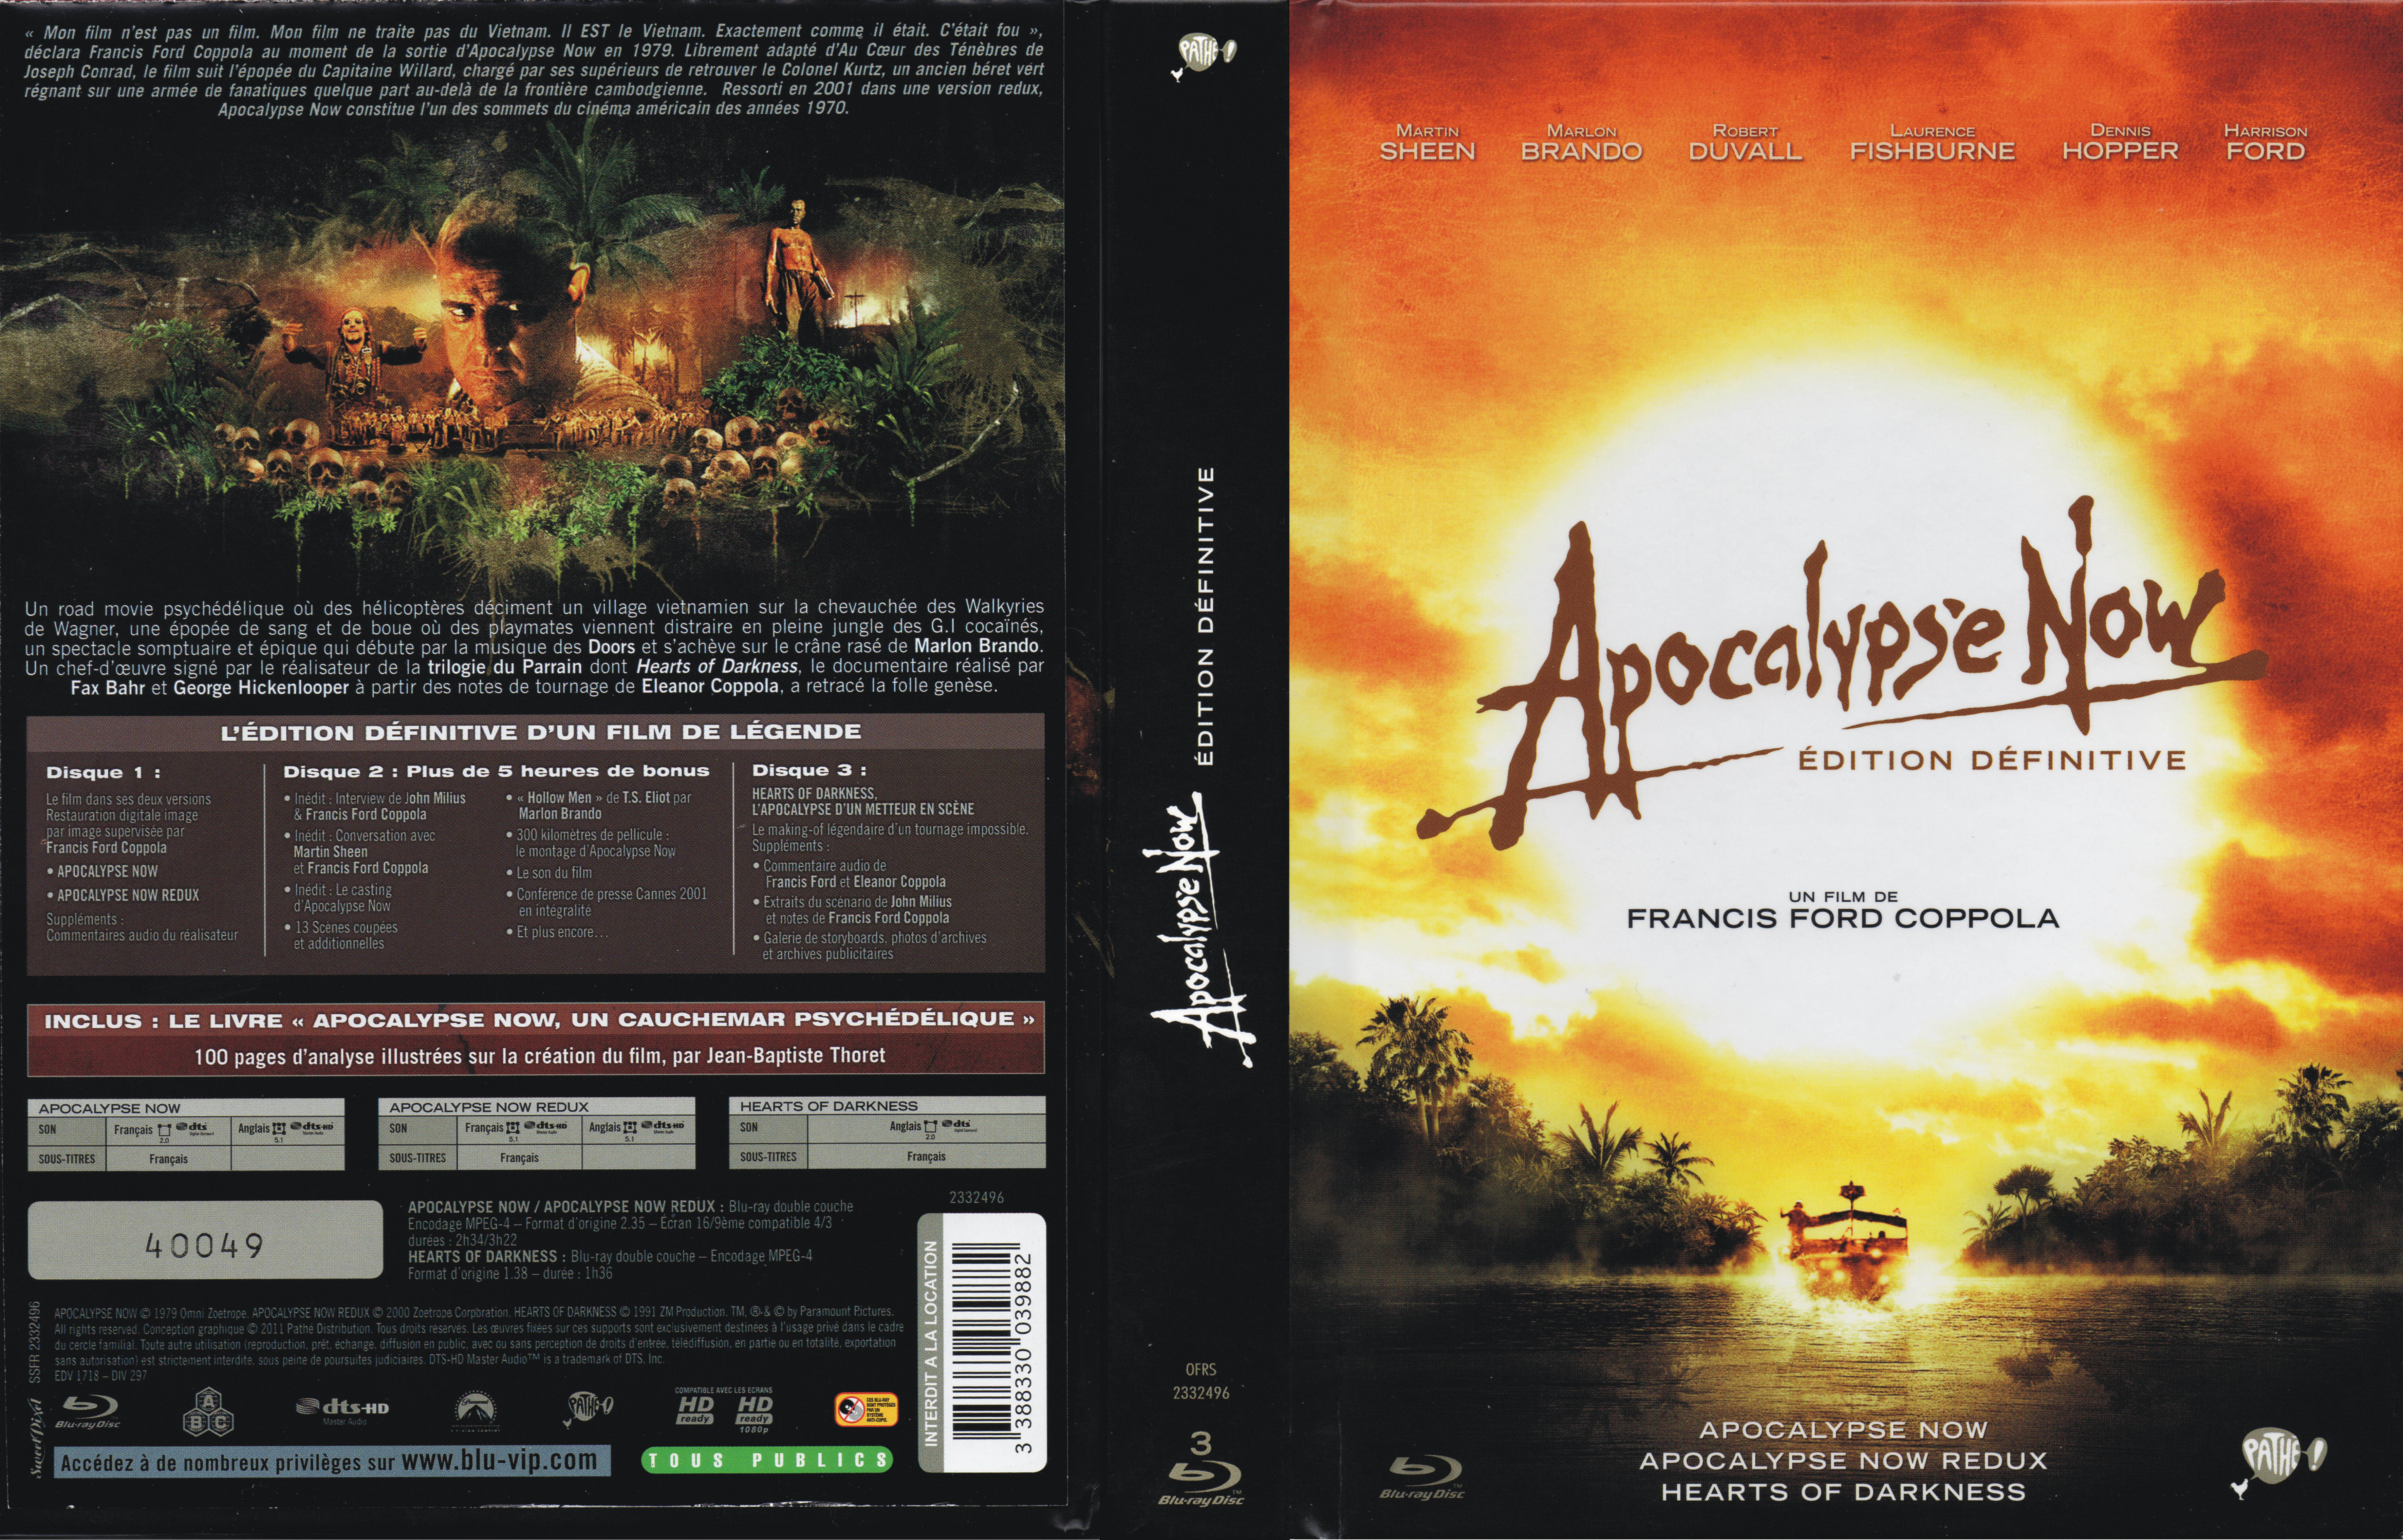 Jaquette DVD Apocalypse now (BLU-RAY) v2